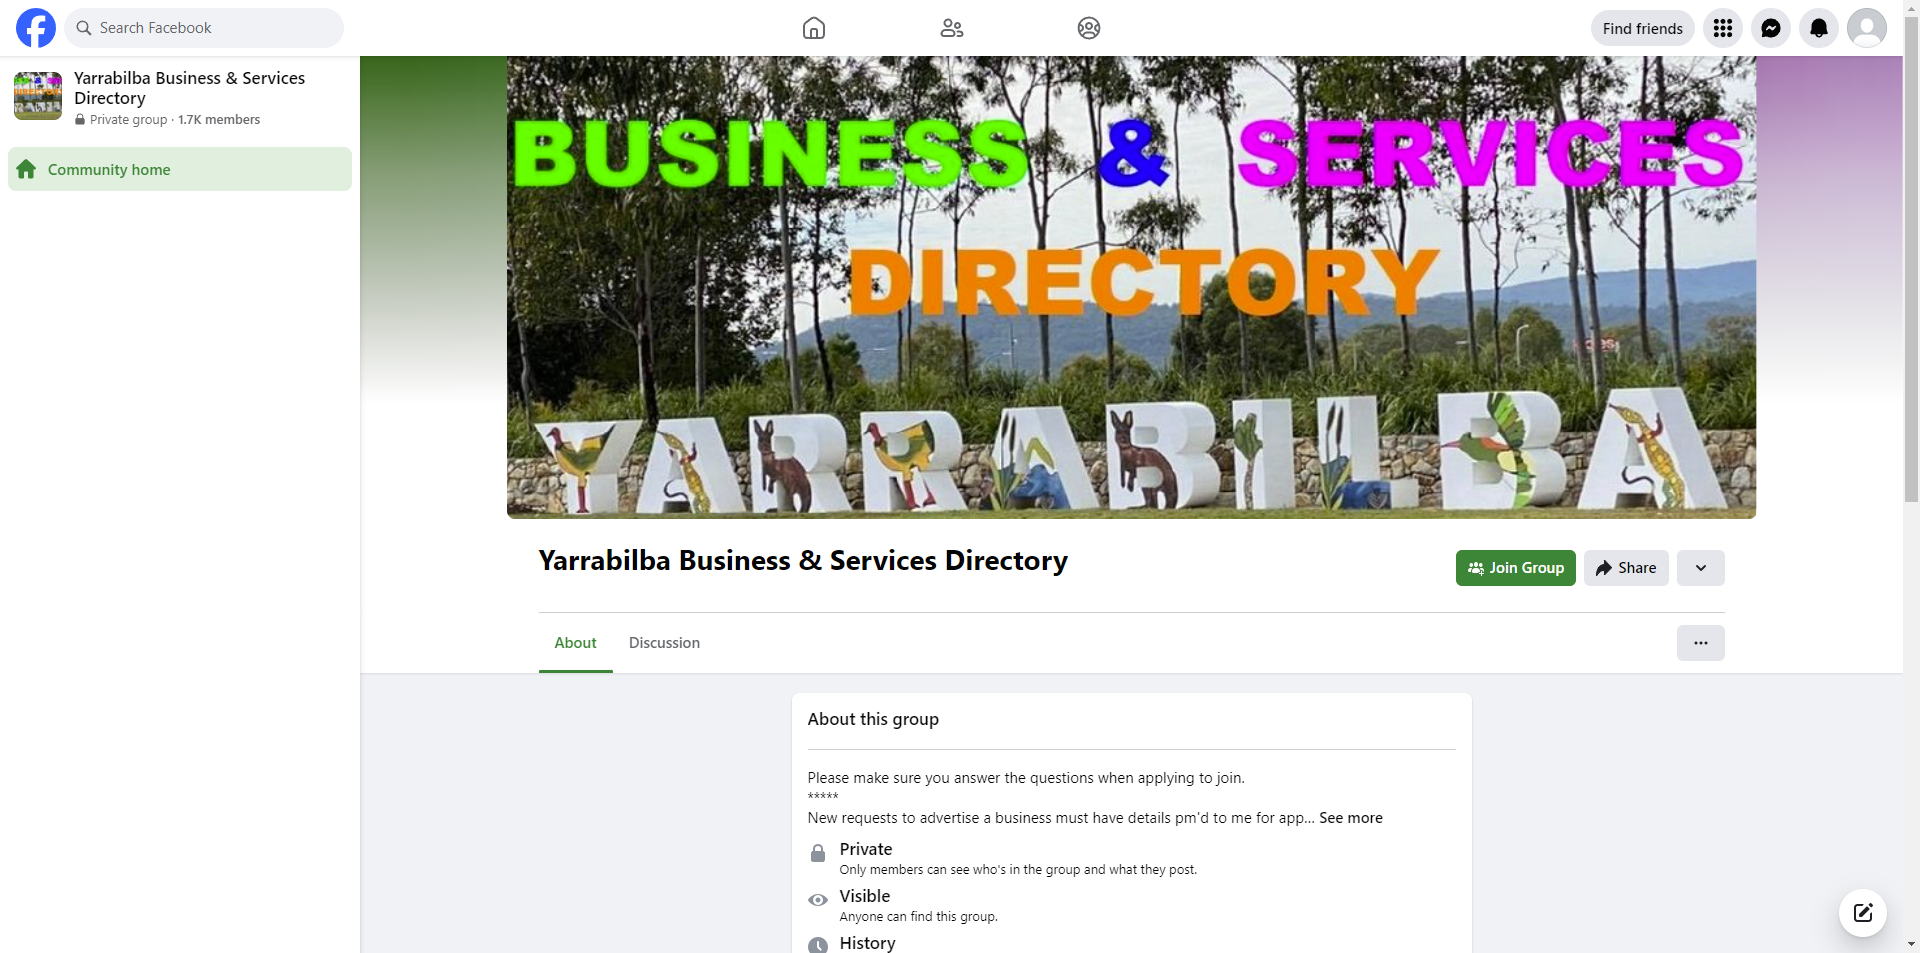 Yarrabilba Business & Services Directory